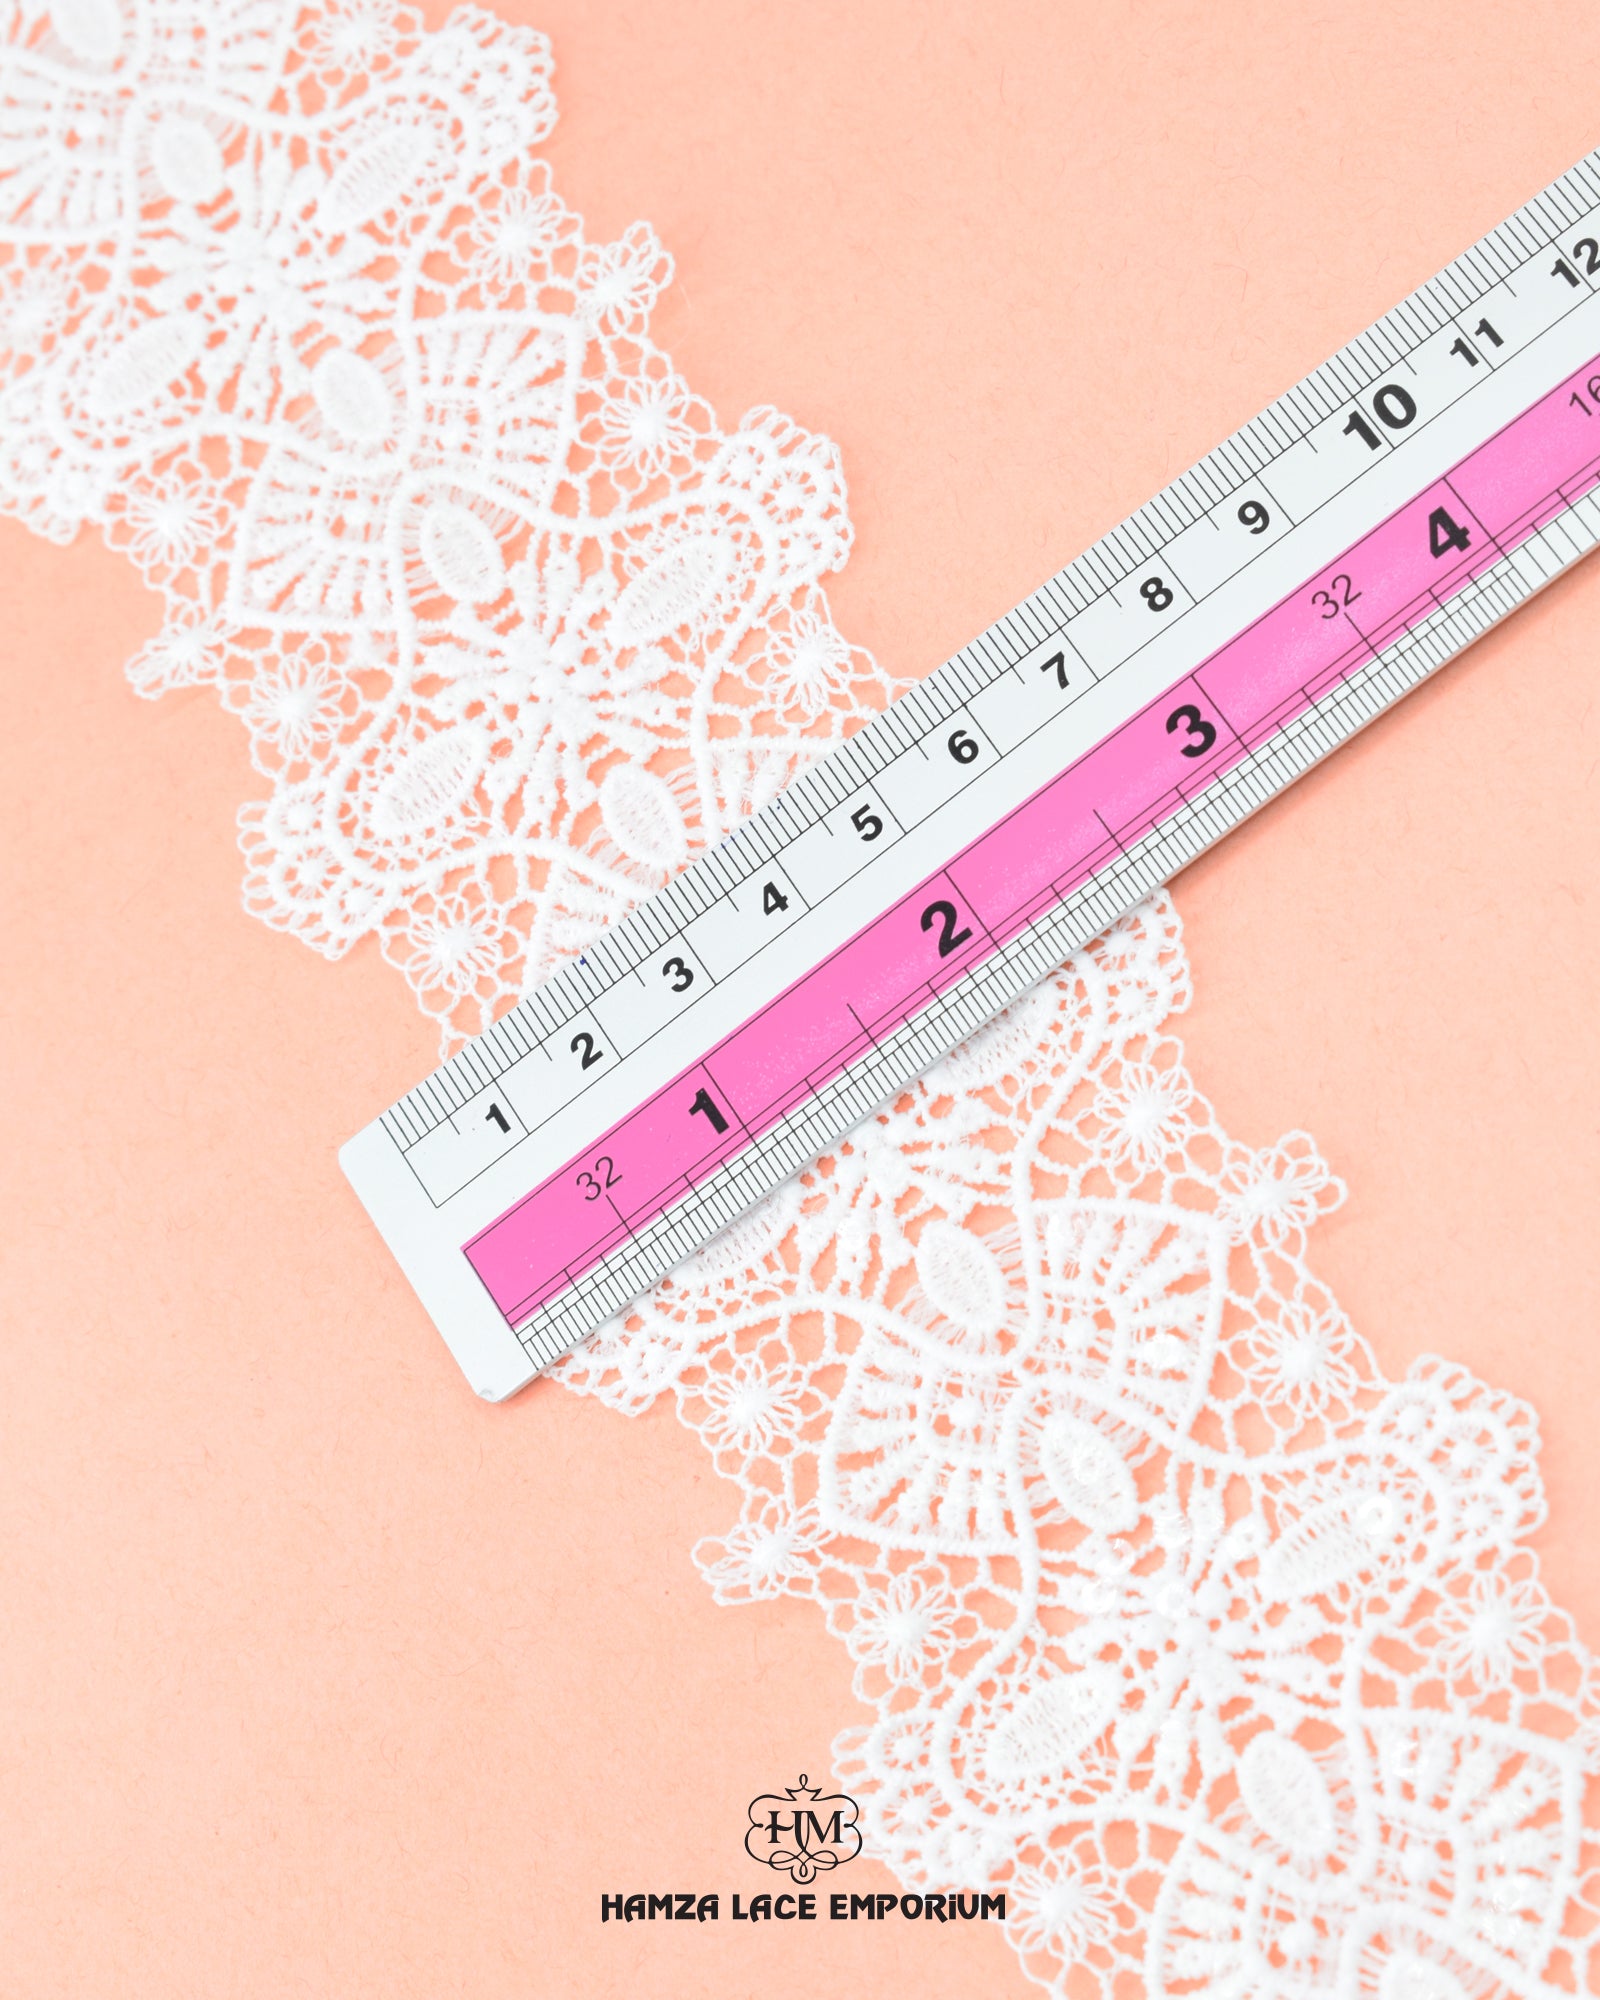 The size of the 'Center Filling Sitara Lace 23017' is given as '2.5' inches by placing a ruler on it